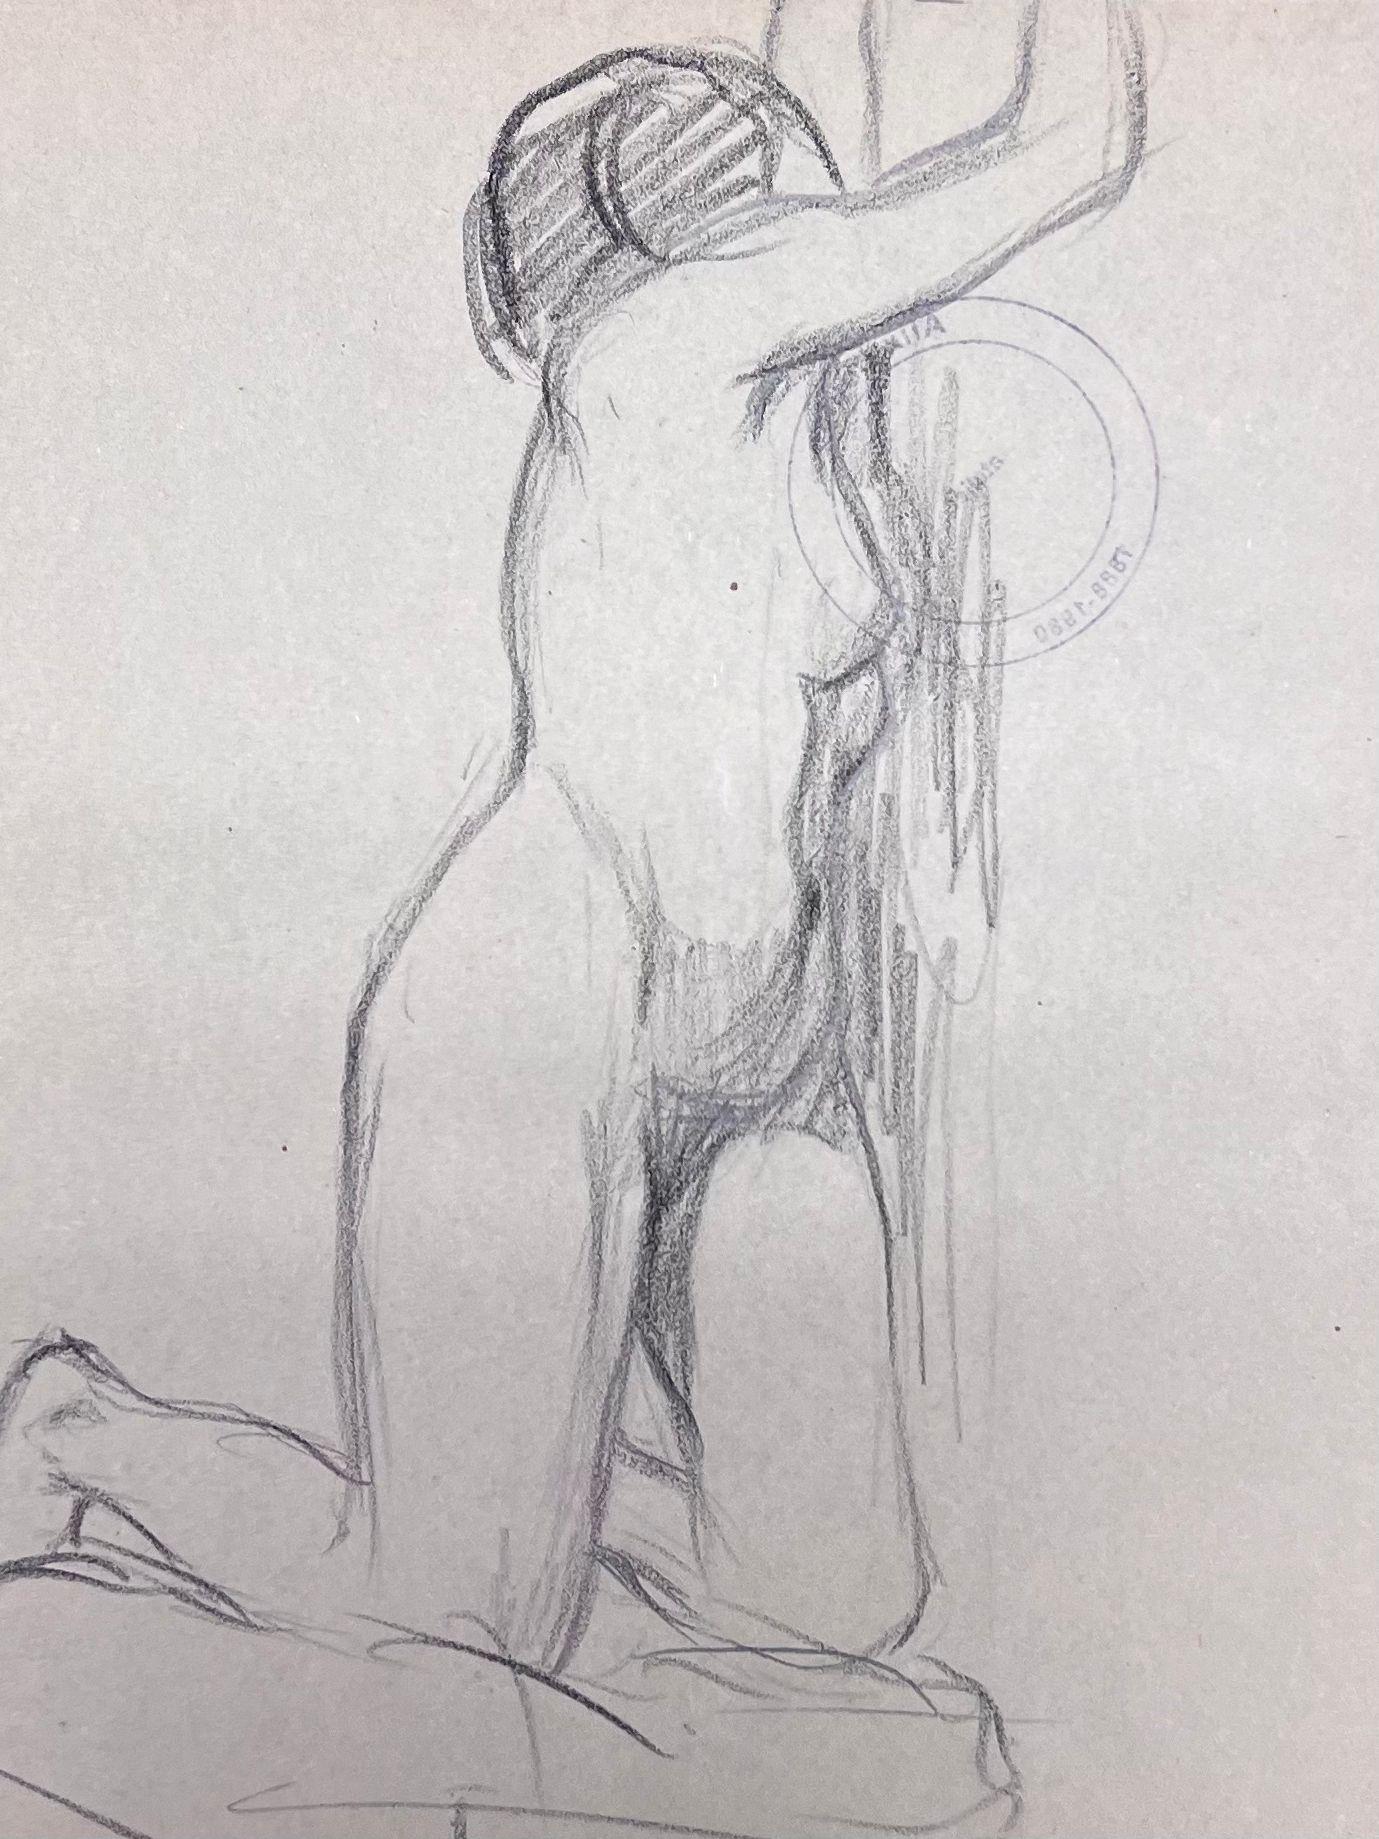 Nude Figure
by Louise Alix (French, 1888-1980) *see notes below
provenance stamp to the back 
pencil drawing on artist paper, unframed
measures: 10 high by 8 inches wide
condition: overall very good and sound, a few scuffs and marks to the surface